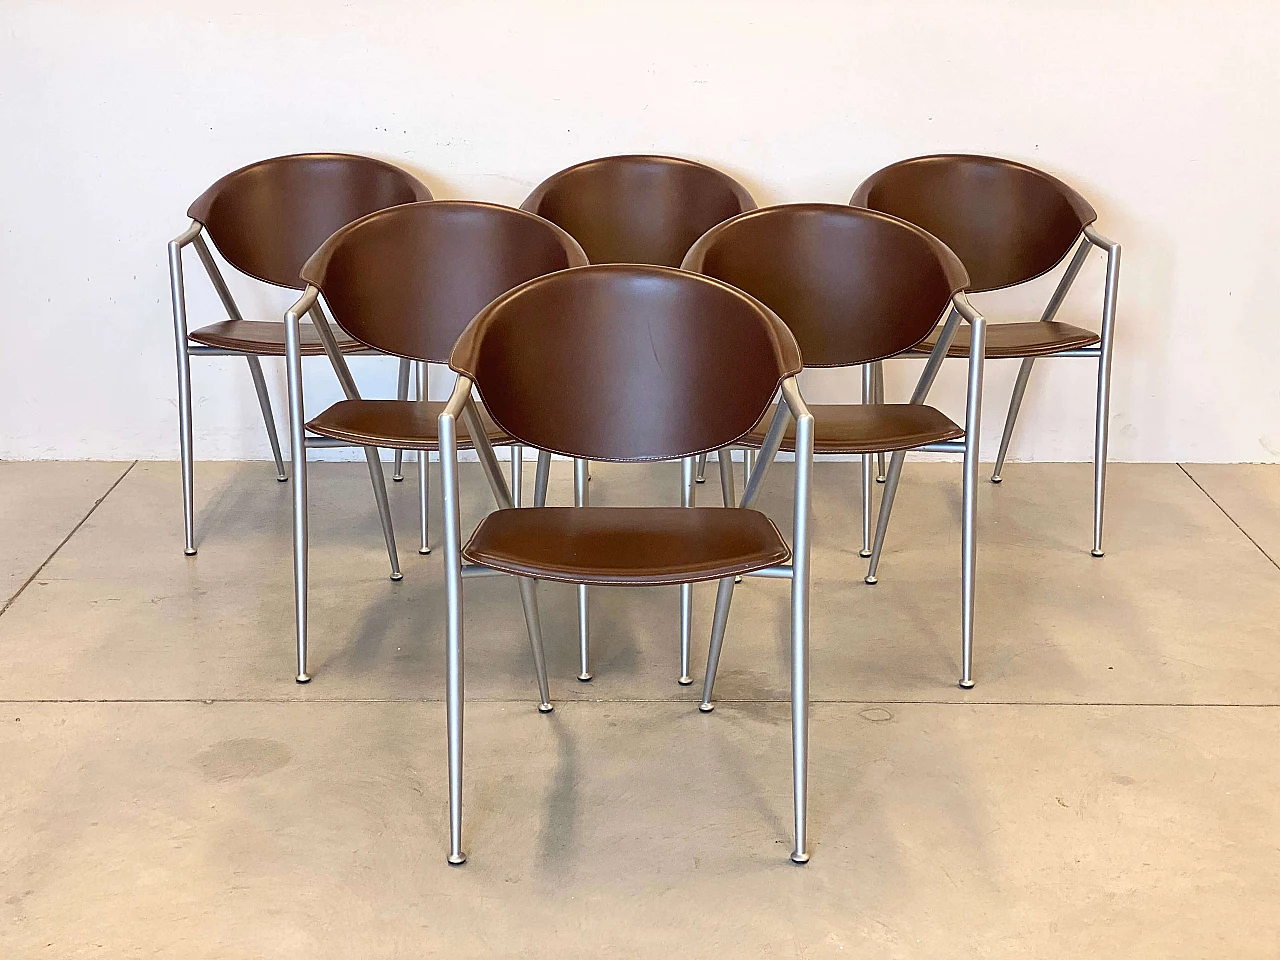 6 Varnished steel and leather chairs by Calligaris, 1990s 1